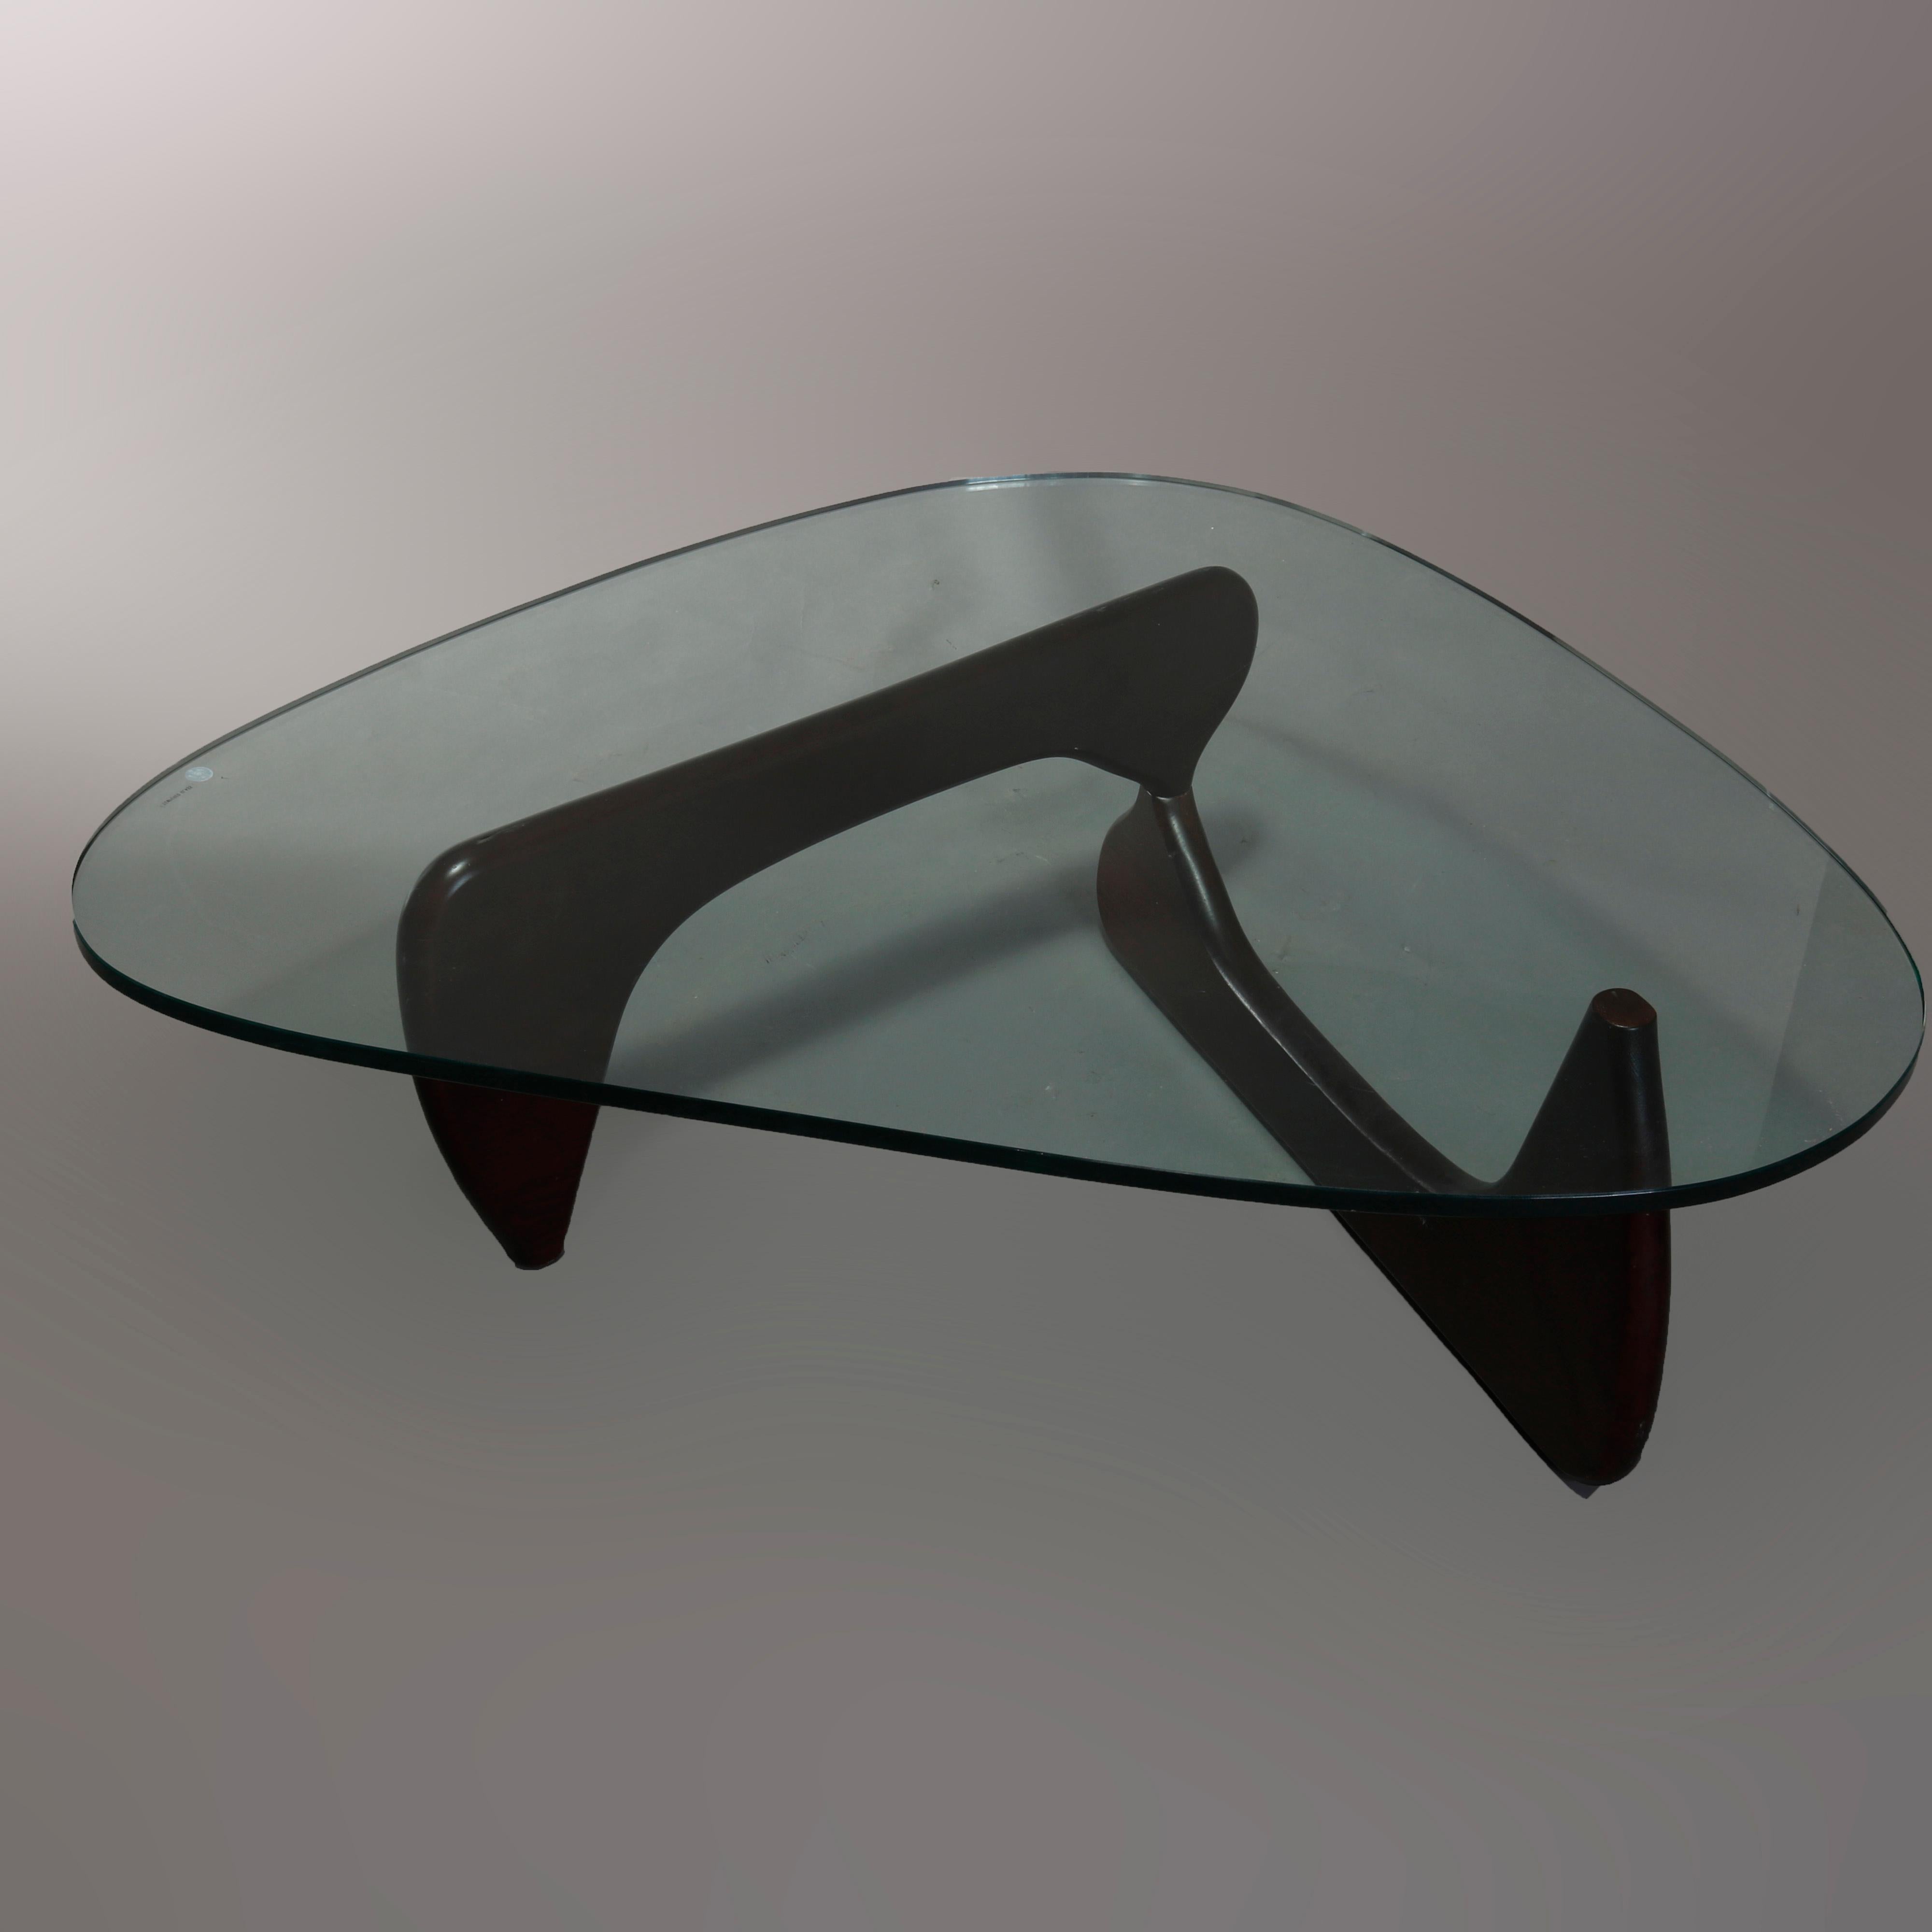 Vintage Mid-Century Modern Noguchi sculptural rudder form coffee table offers stylized triangular glass top over walnut base, attributed to Herman Miller, 20th century.

Measures: 15.75